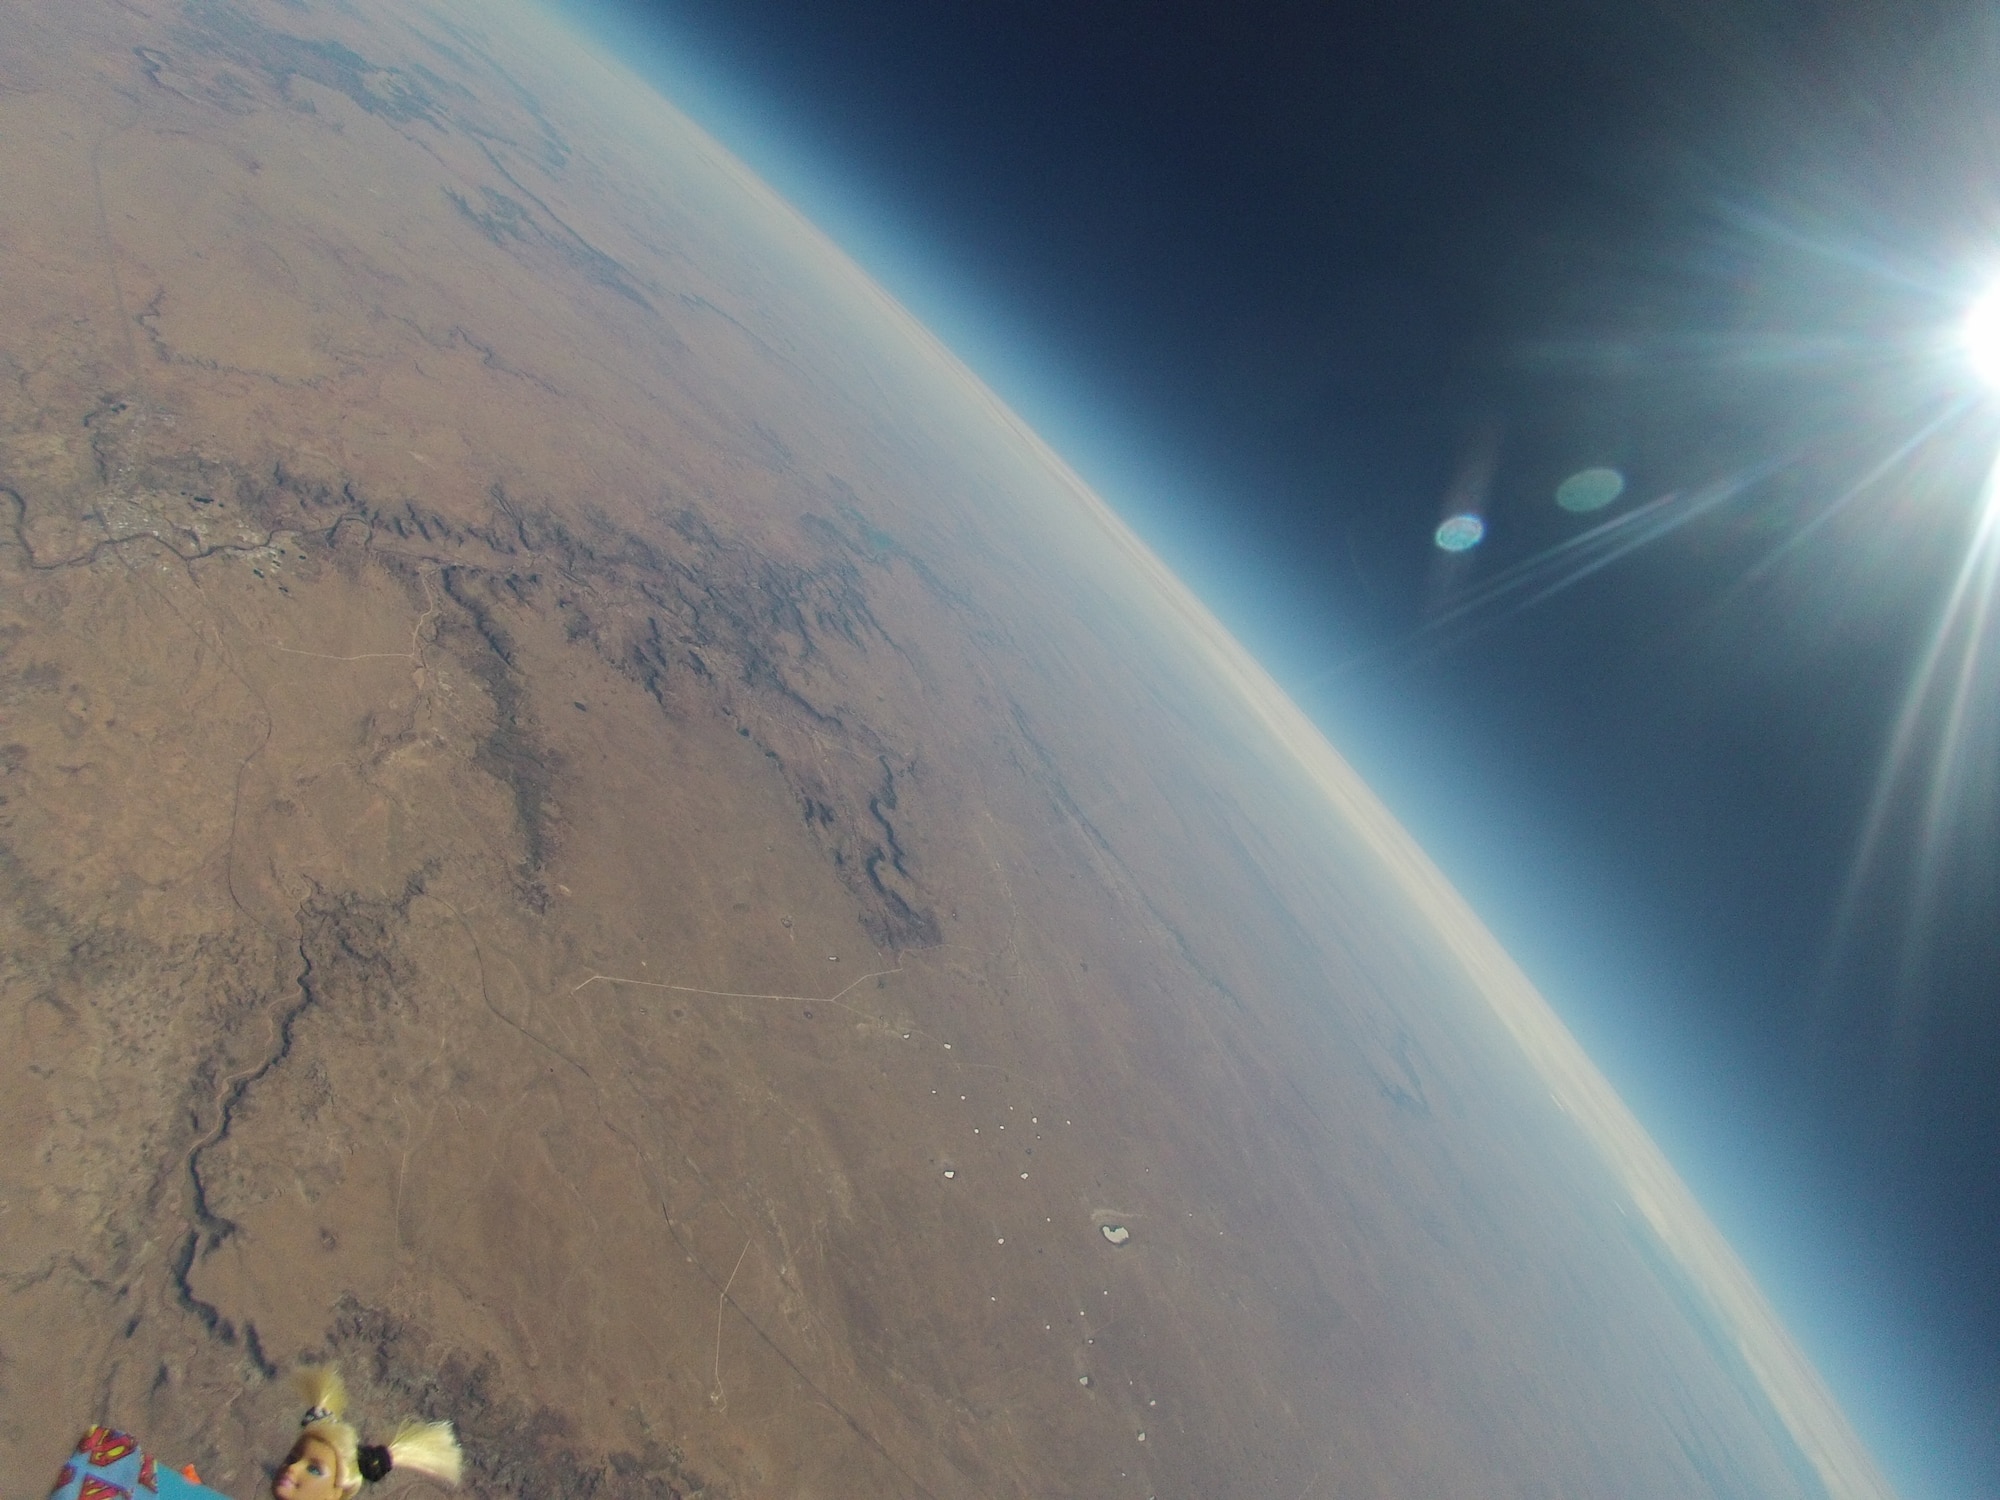 An image of the earth taken by the high-altitude helium balloon launched recently by Albuquerque Public School District and Valley High School’s AF JROTC unit. The cadets sent a doll, lower left, along for the ride. (Contributed/Cleared)